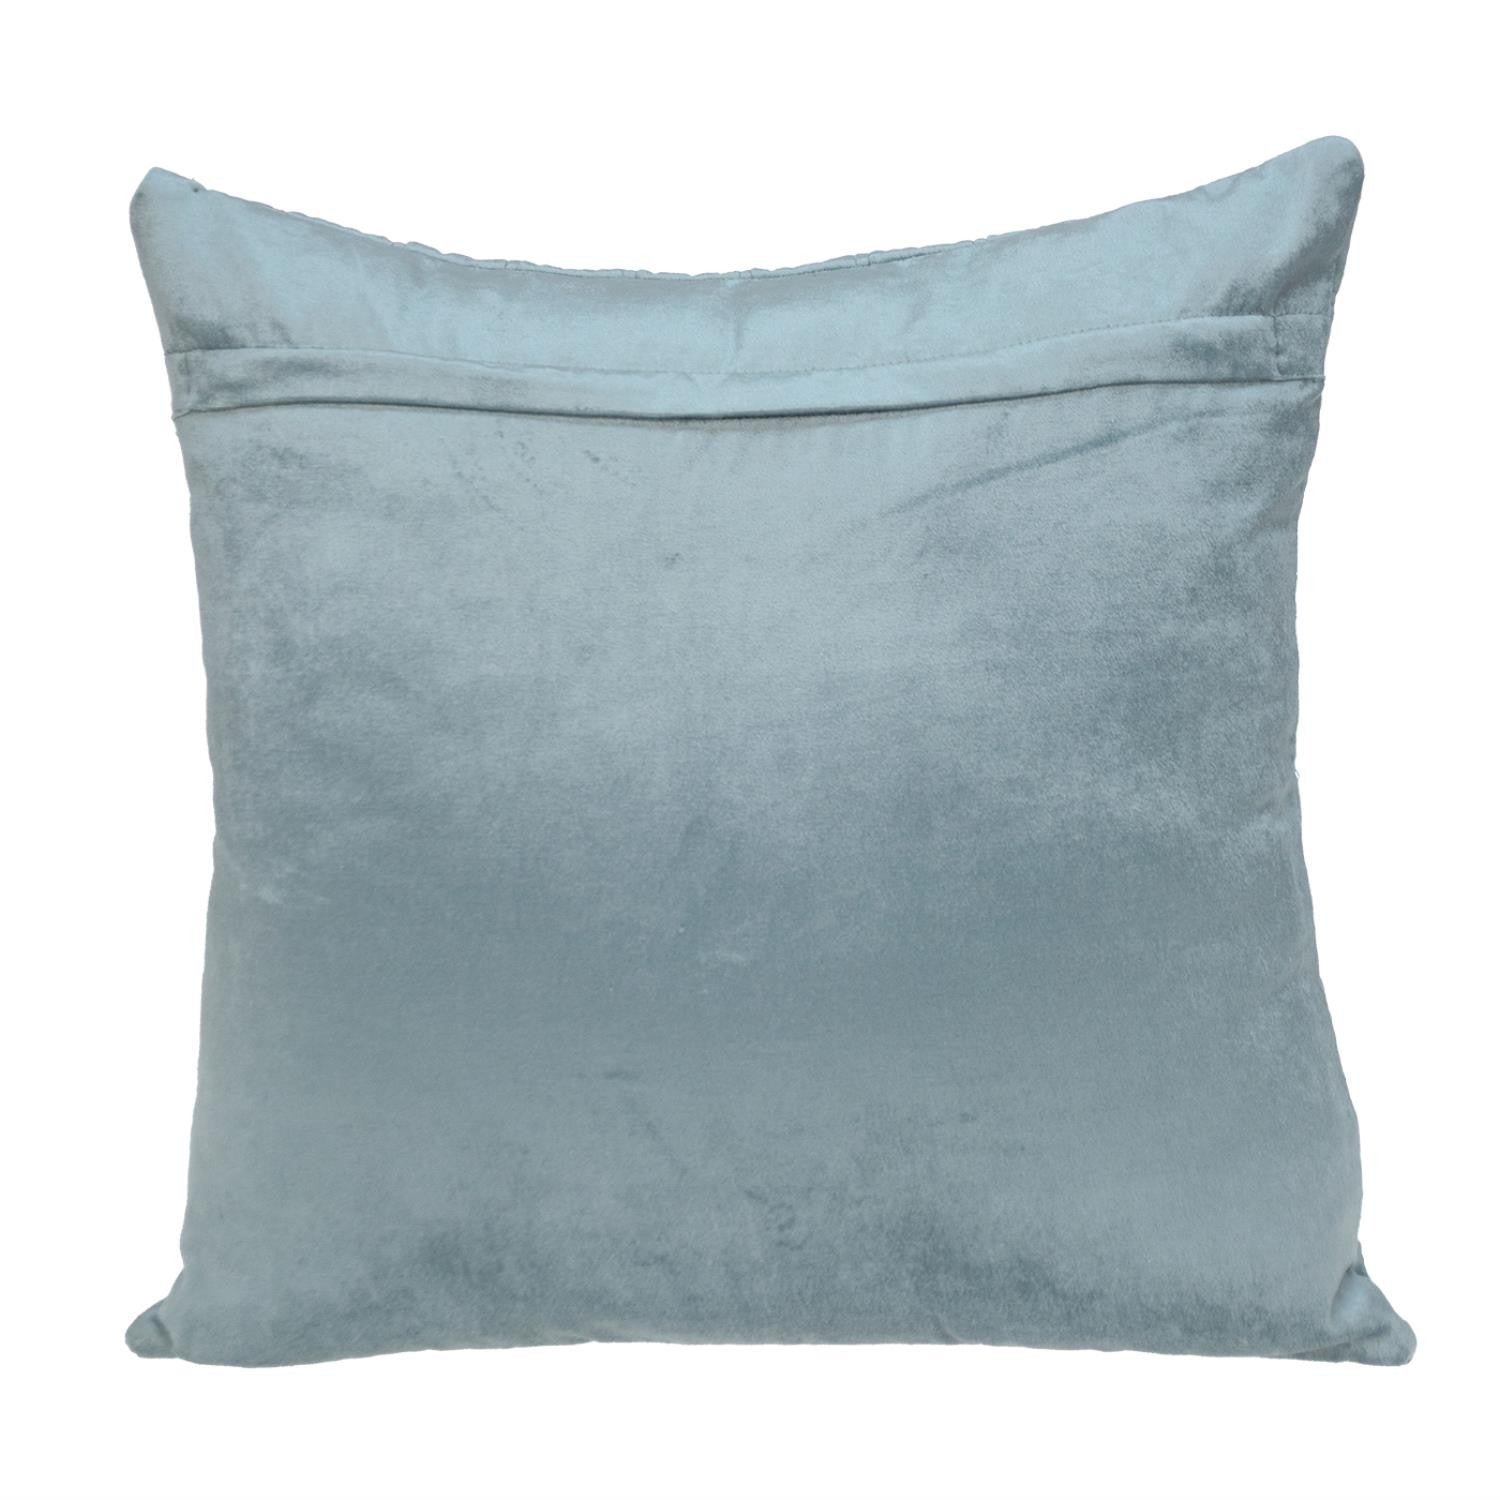 Gray Quilted Decorative Throw Pillow